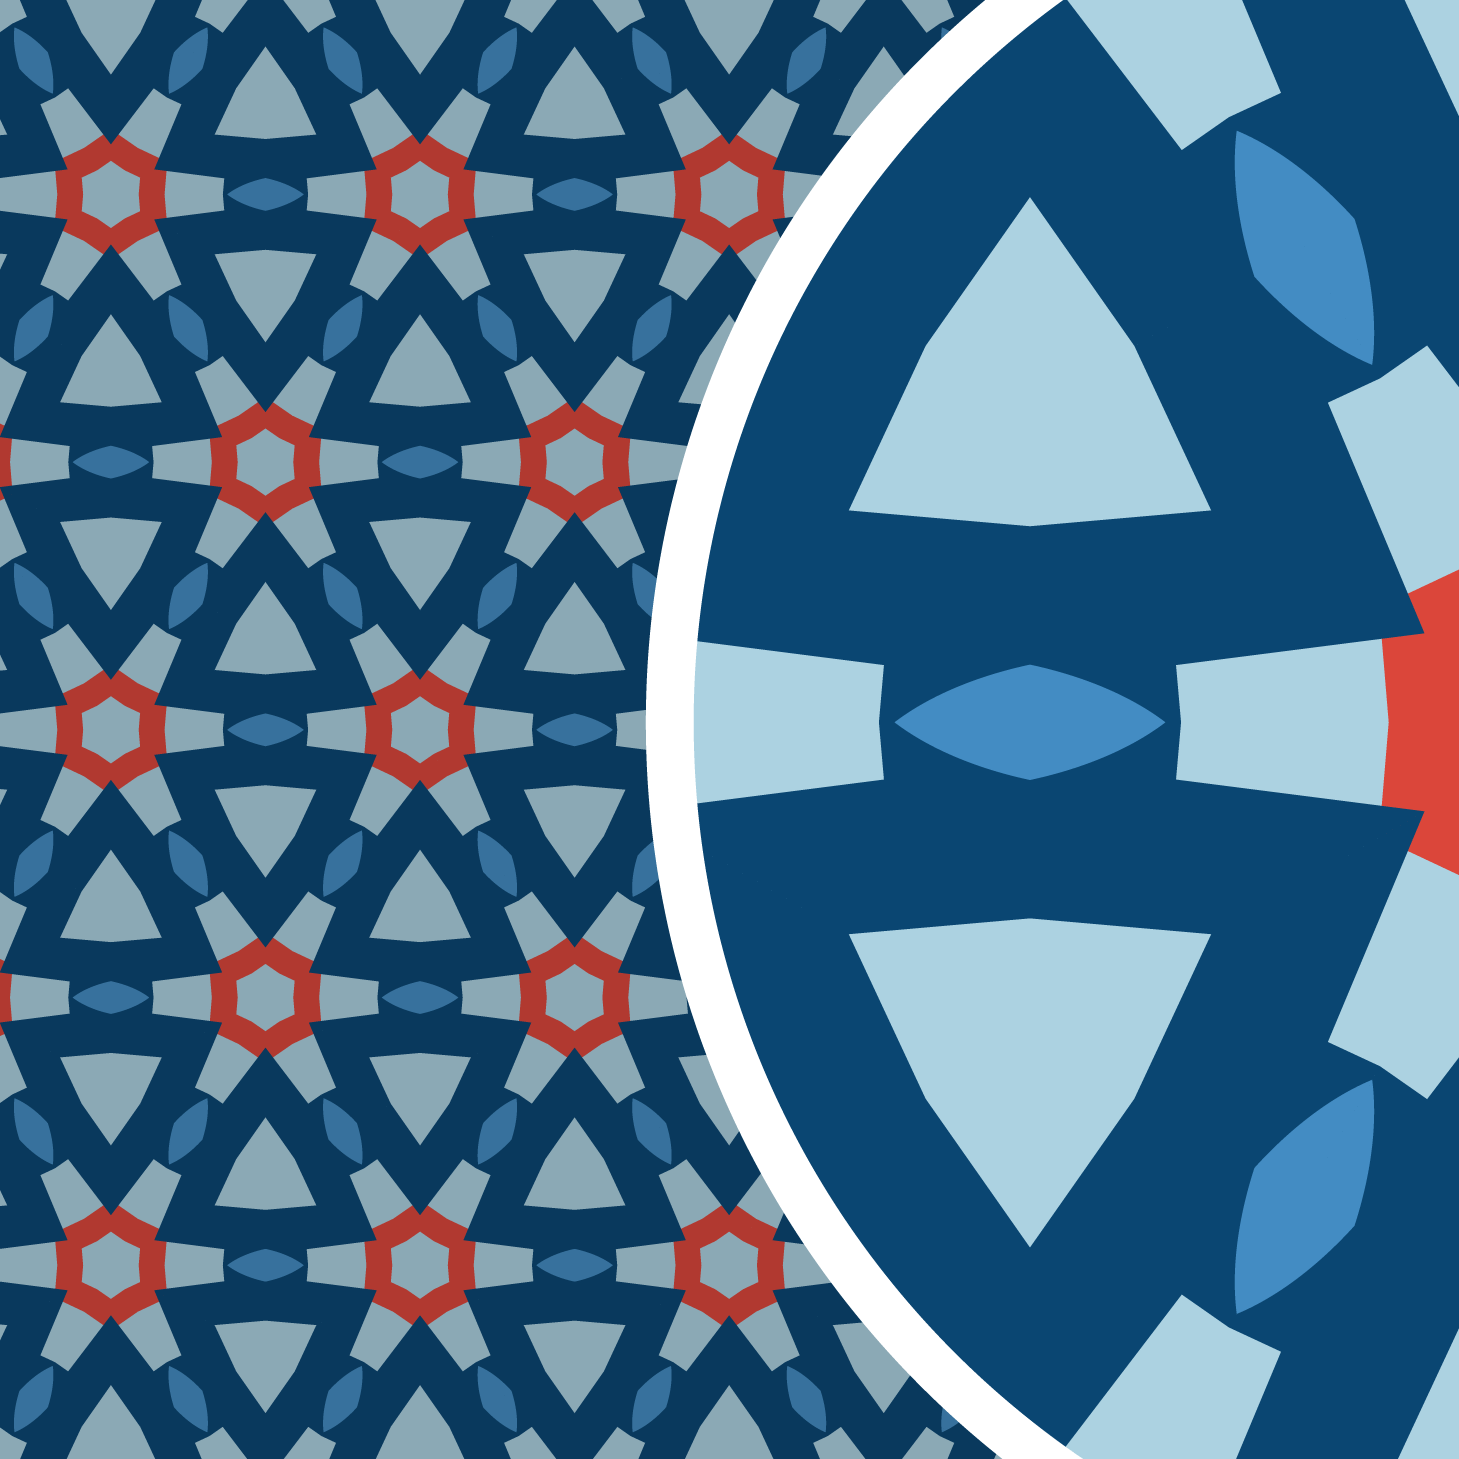 New: Create patterns in vector